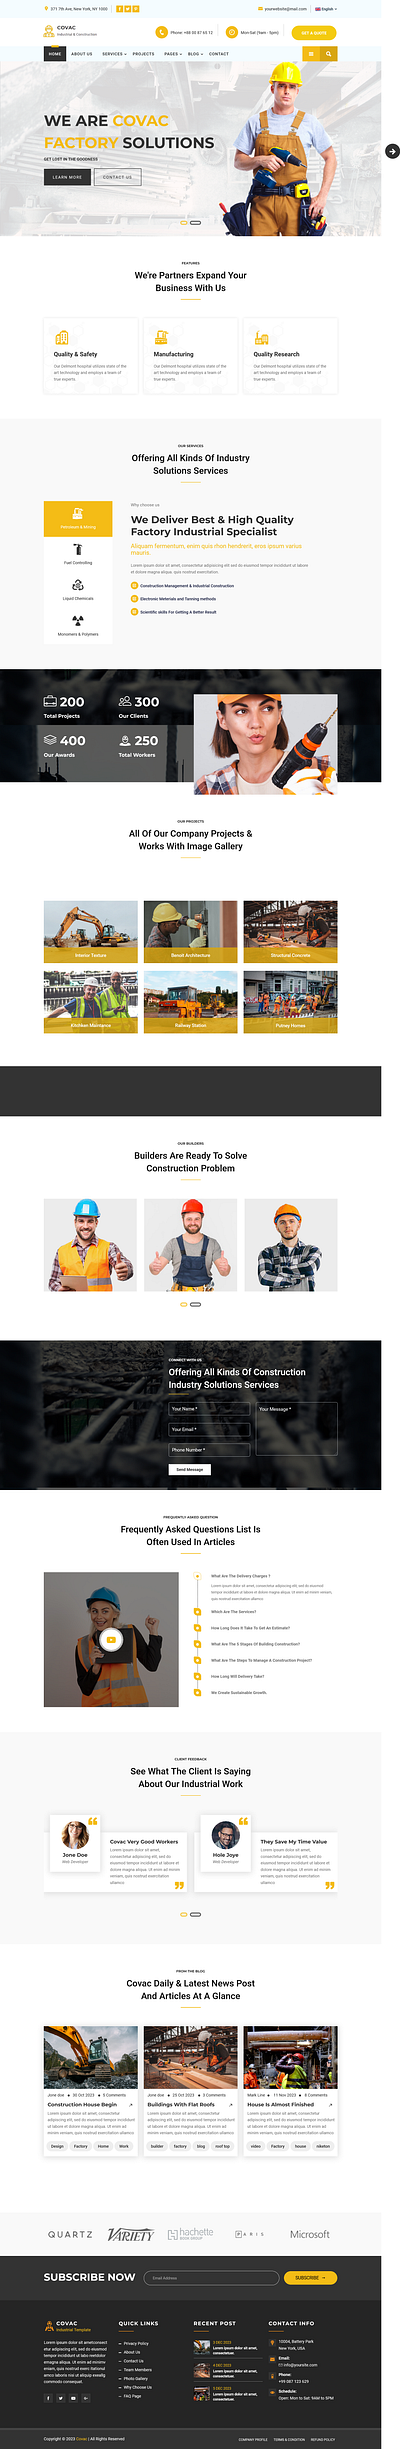 Covac - Industrial Construction Business Html5 Template animation architecture branding building business construction contractor creative engineer engineering exterior design factory graphic design industrial industrial and construction industry logo renovation responsive ui